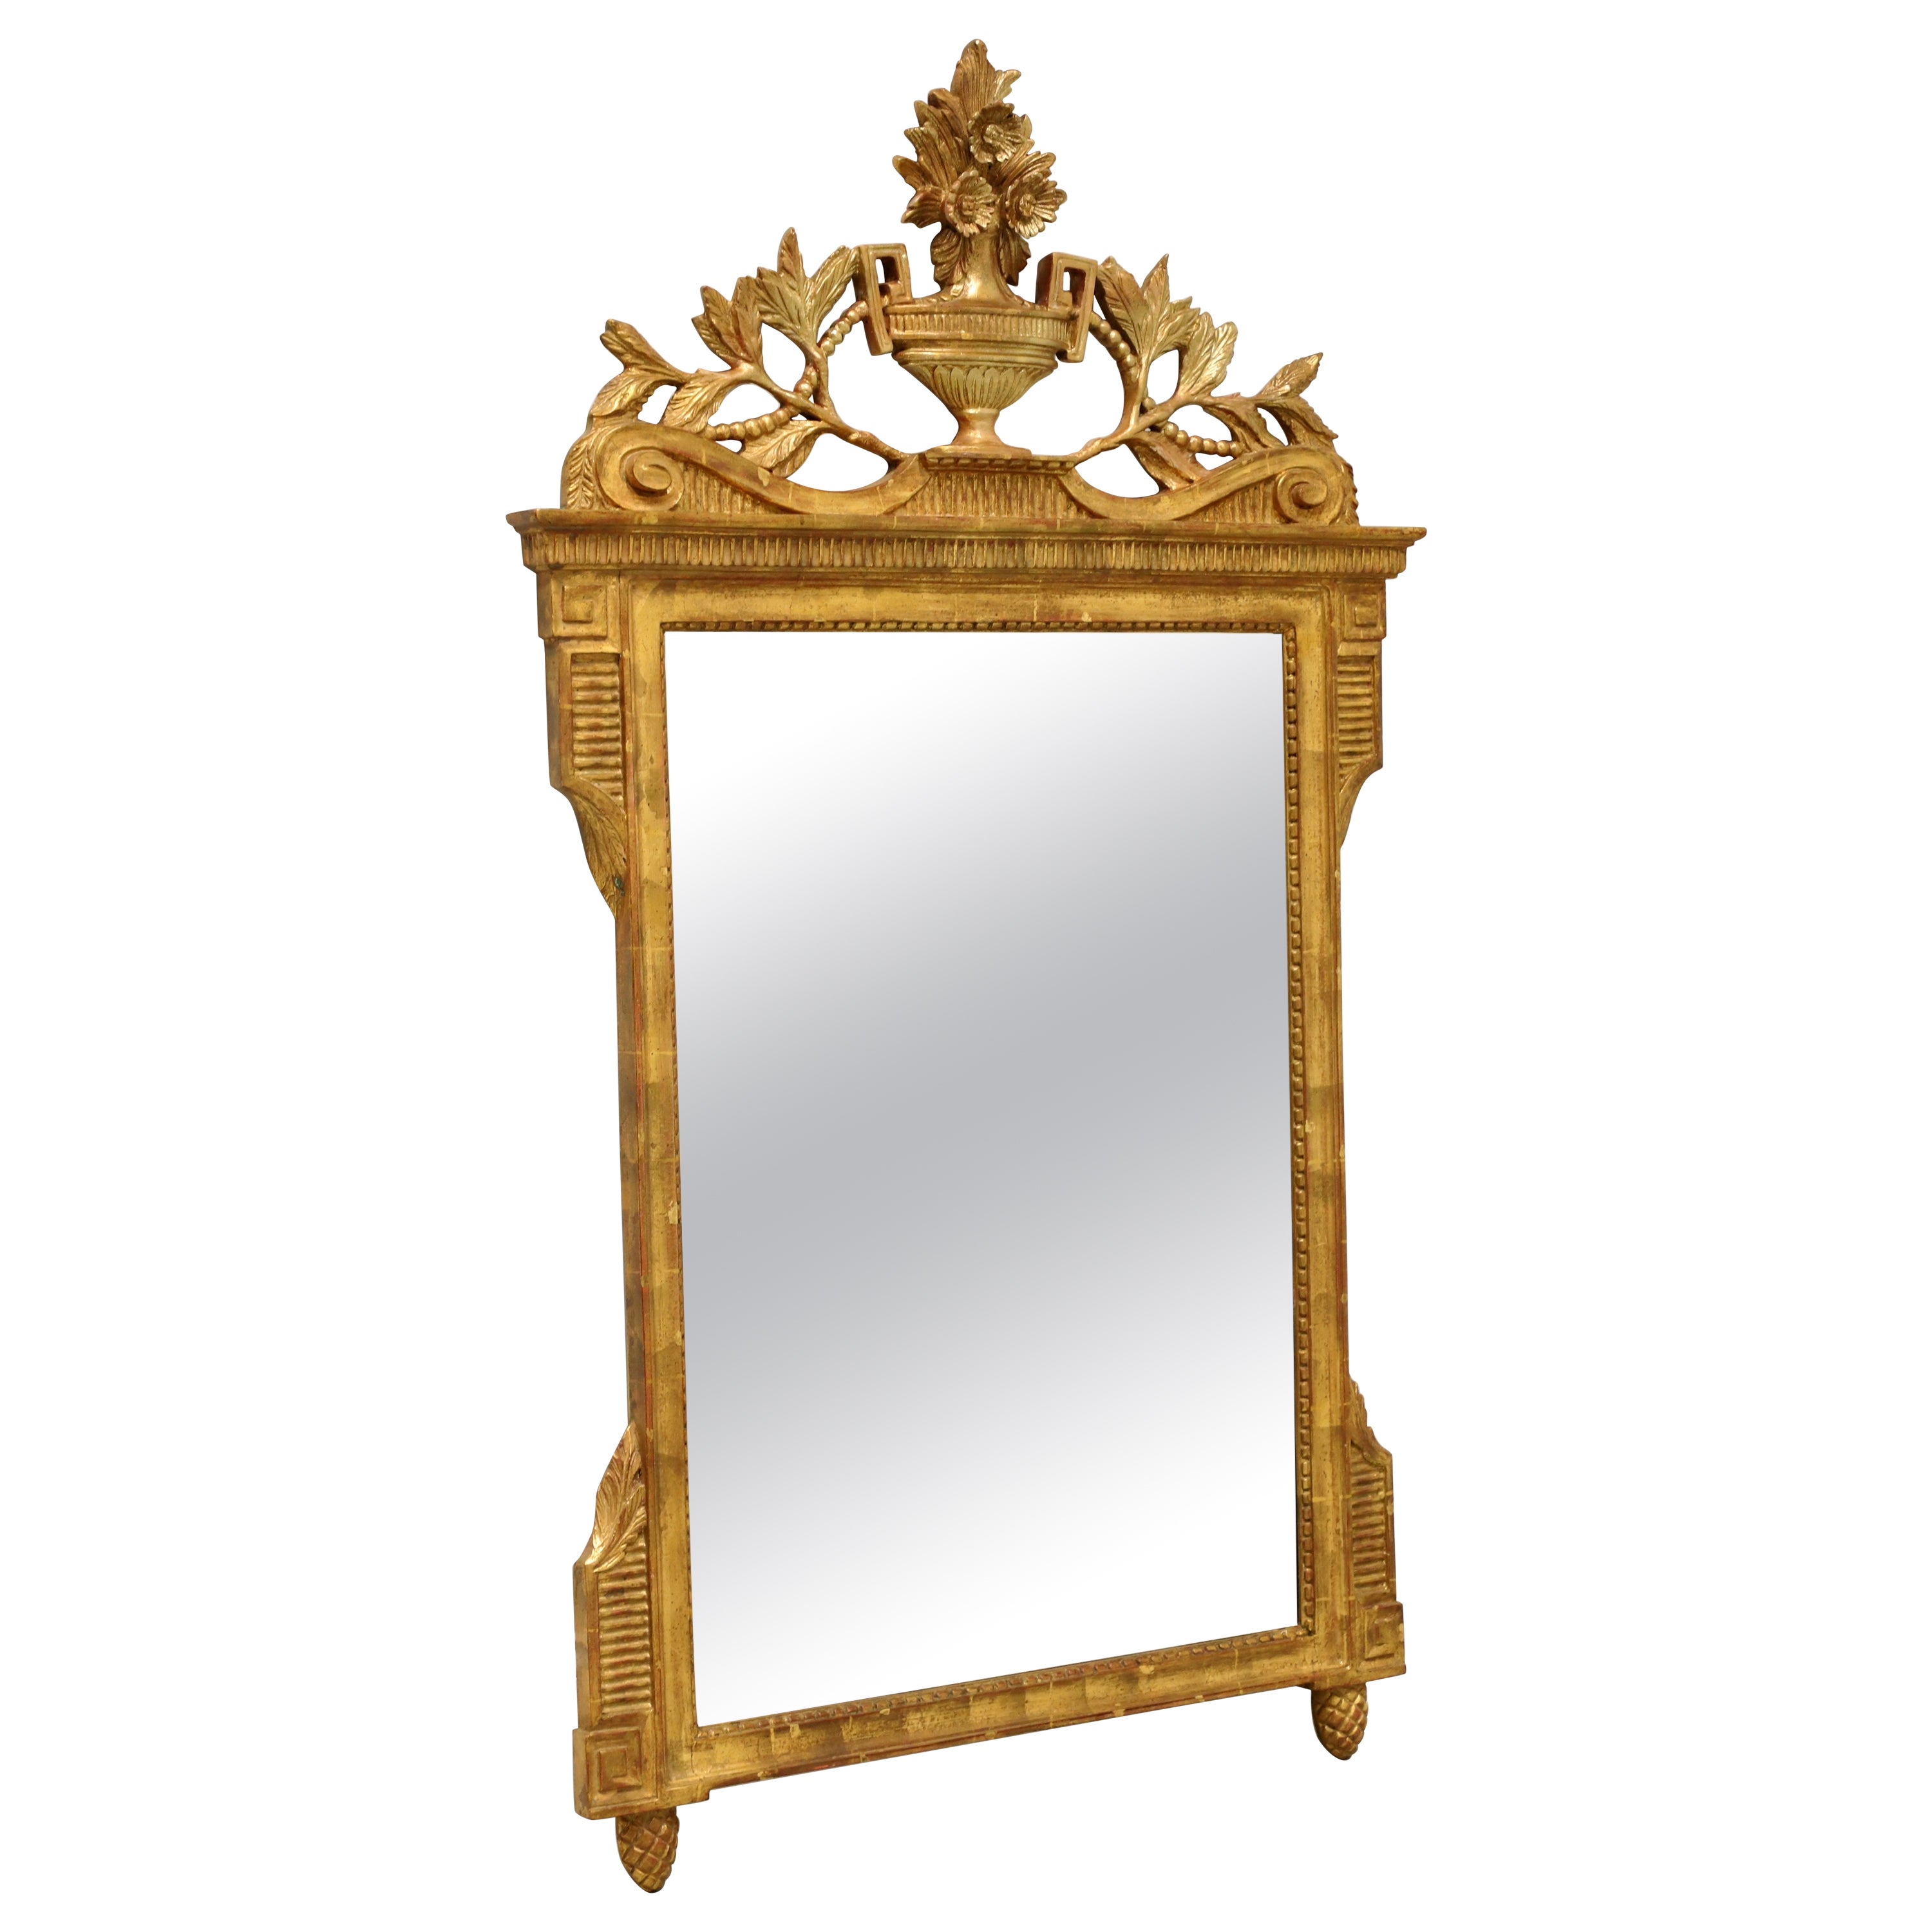 Composition Mantel Mirrors and Fireplace Mirrors